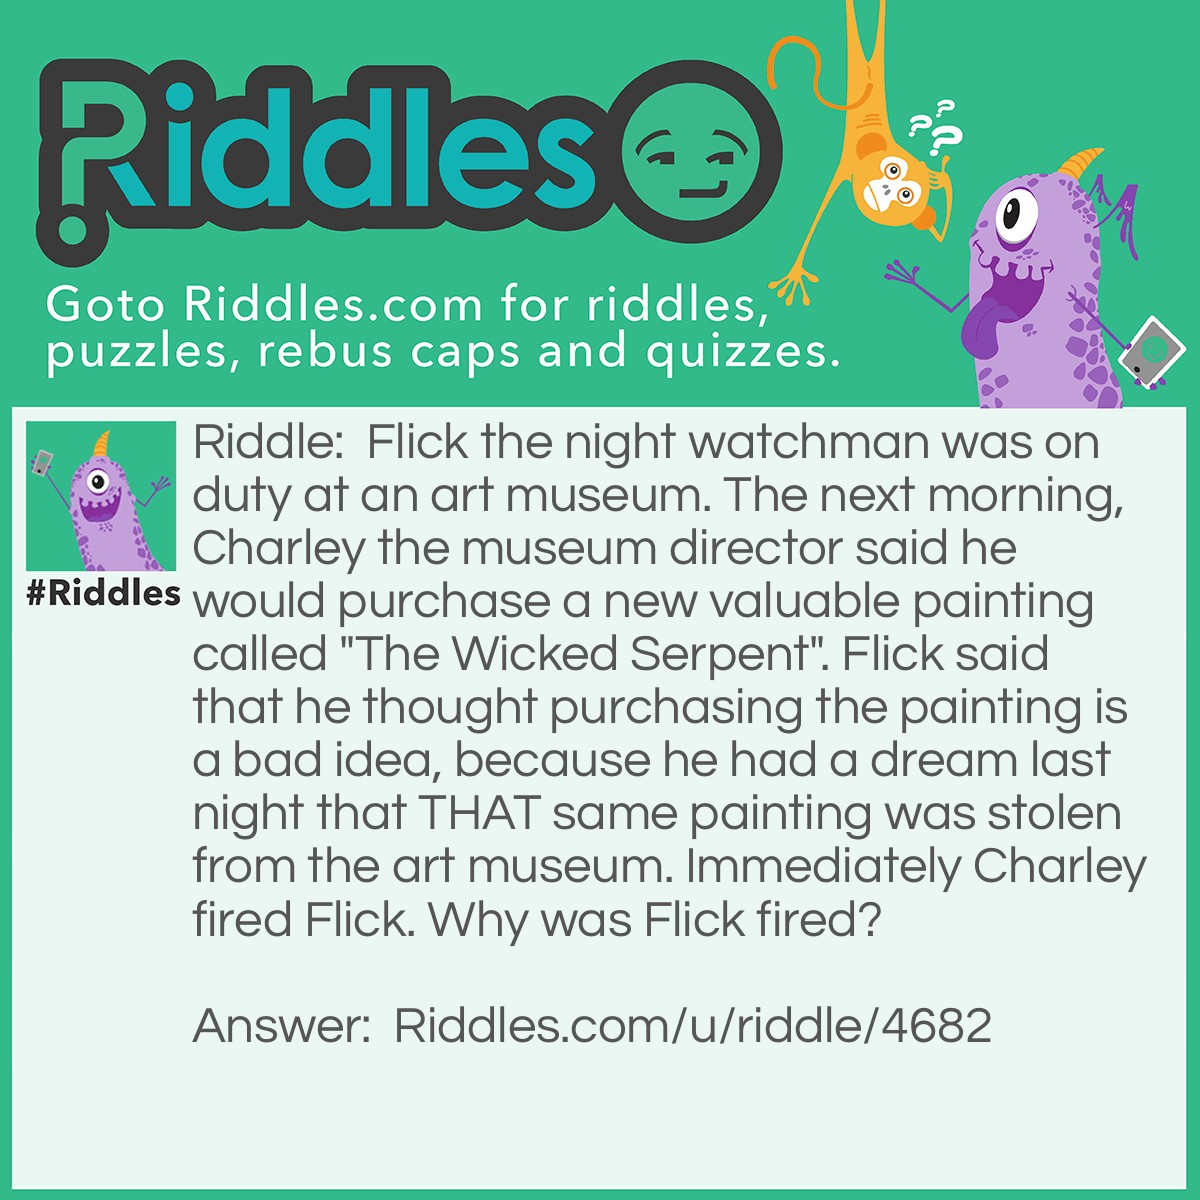 Riddle: Flick the night watchman was on duty at an art museum. The next morning, Charley the museum director said he would purchase a new valuable painting called "The Wicked Serpent". Flick said that he thought purchasing the painting is a bad idea, because he had a dream last night that THAT same painting was stolen from the art museum. Immediately Charley fired Flick. Why was Flick fired? Answer: Flick was fired, because he was asleep during his shift and dreaming.